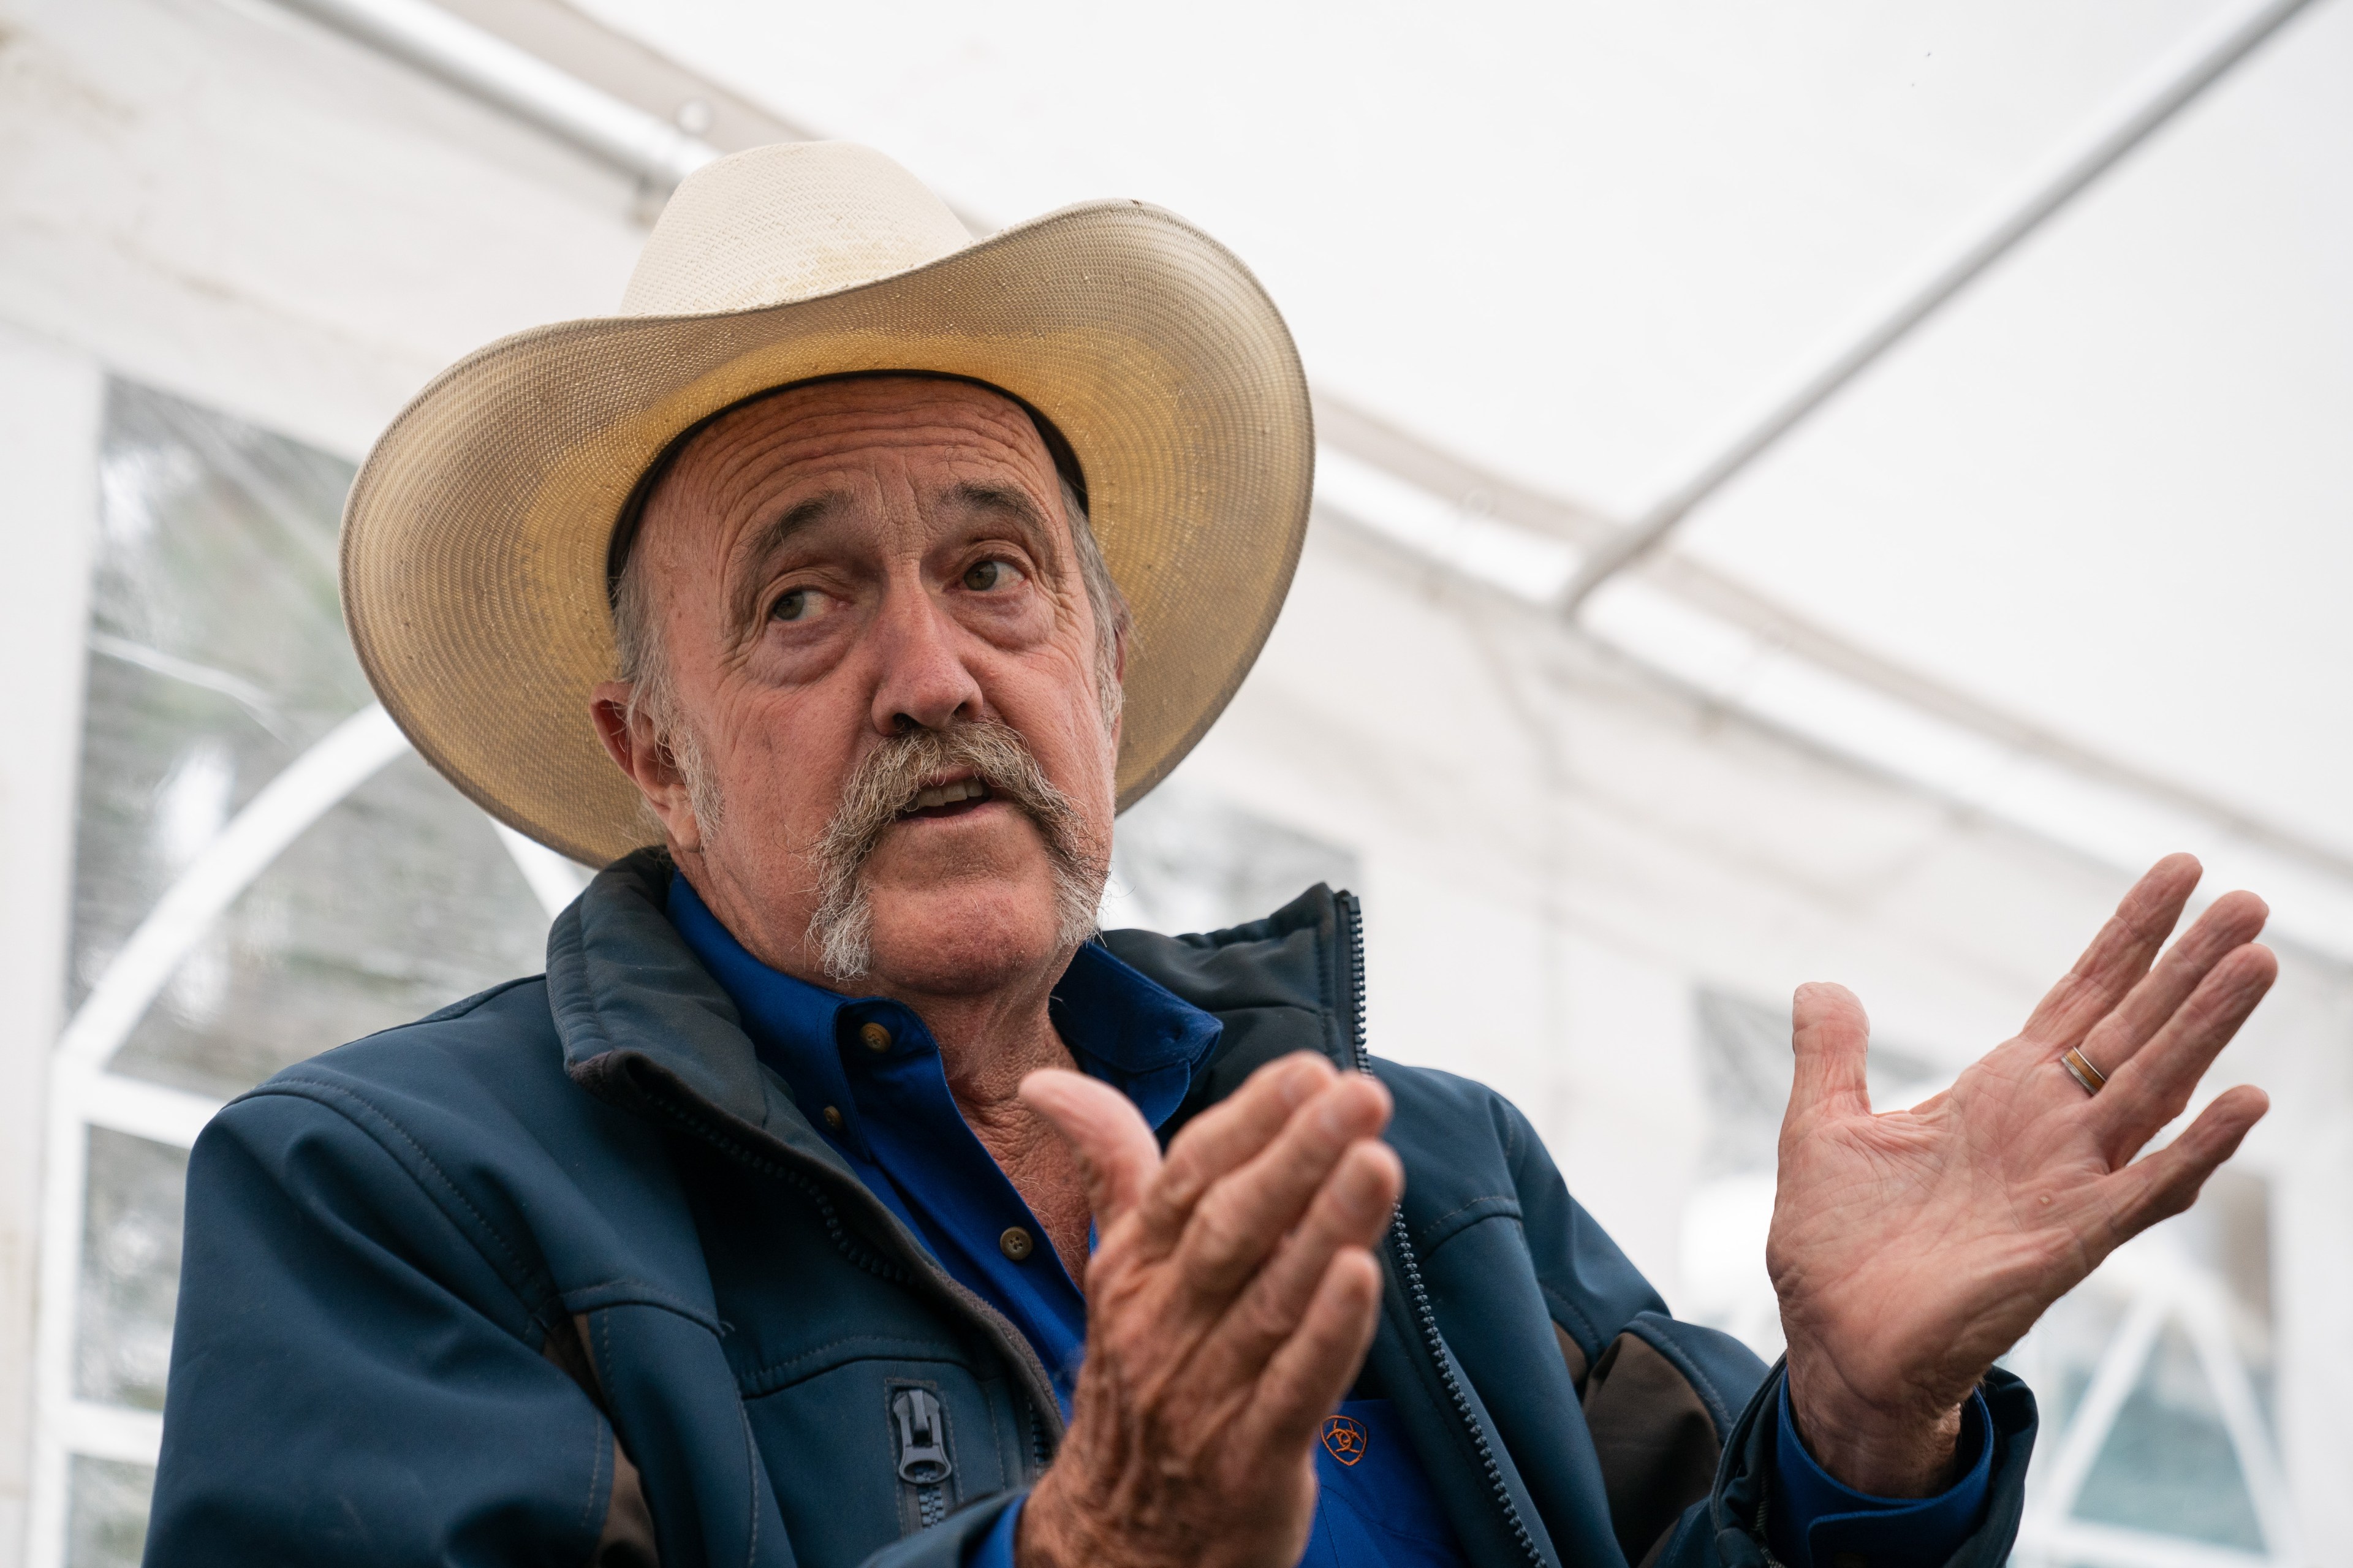 An elderly man in a cowboy hat and blue jacket is gesturing with his hands while speaking. He has a mustache and the background reveals a white tent.